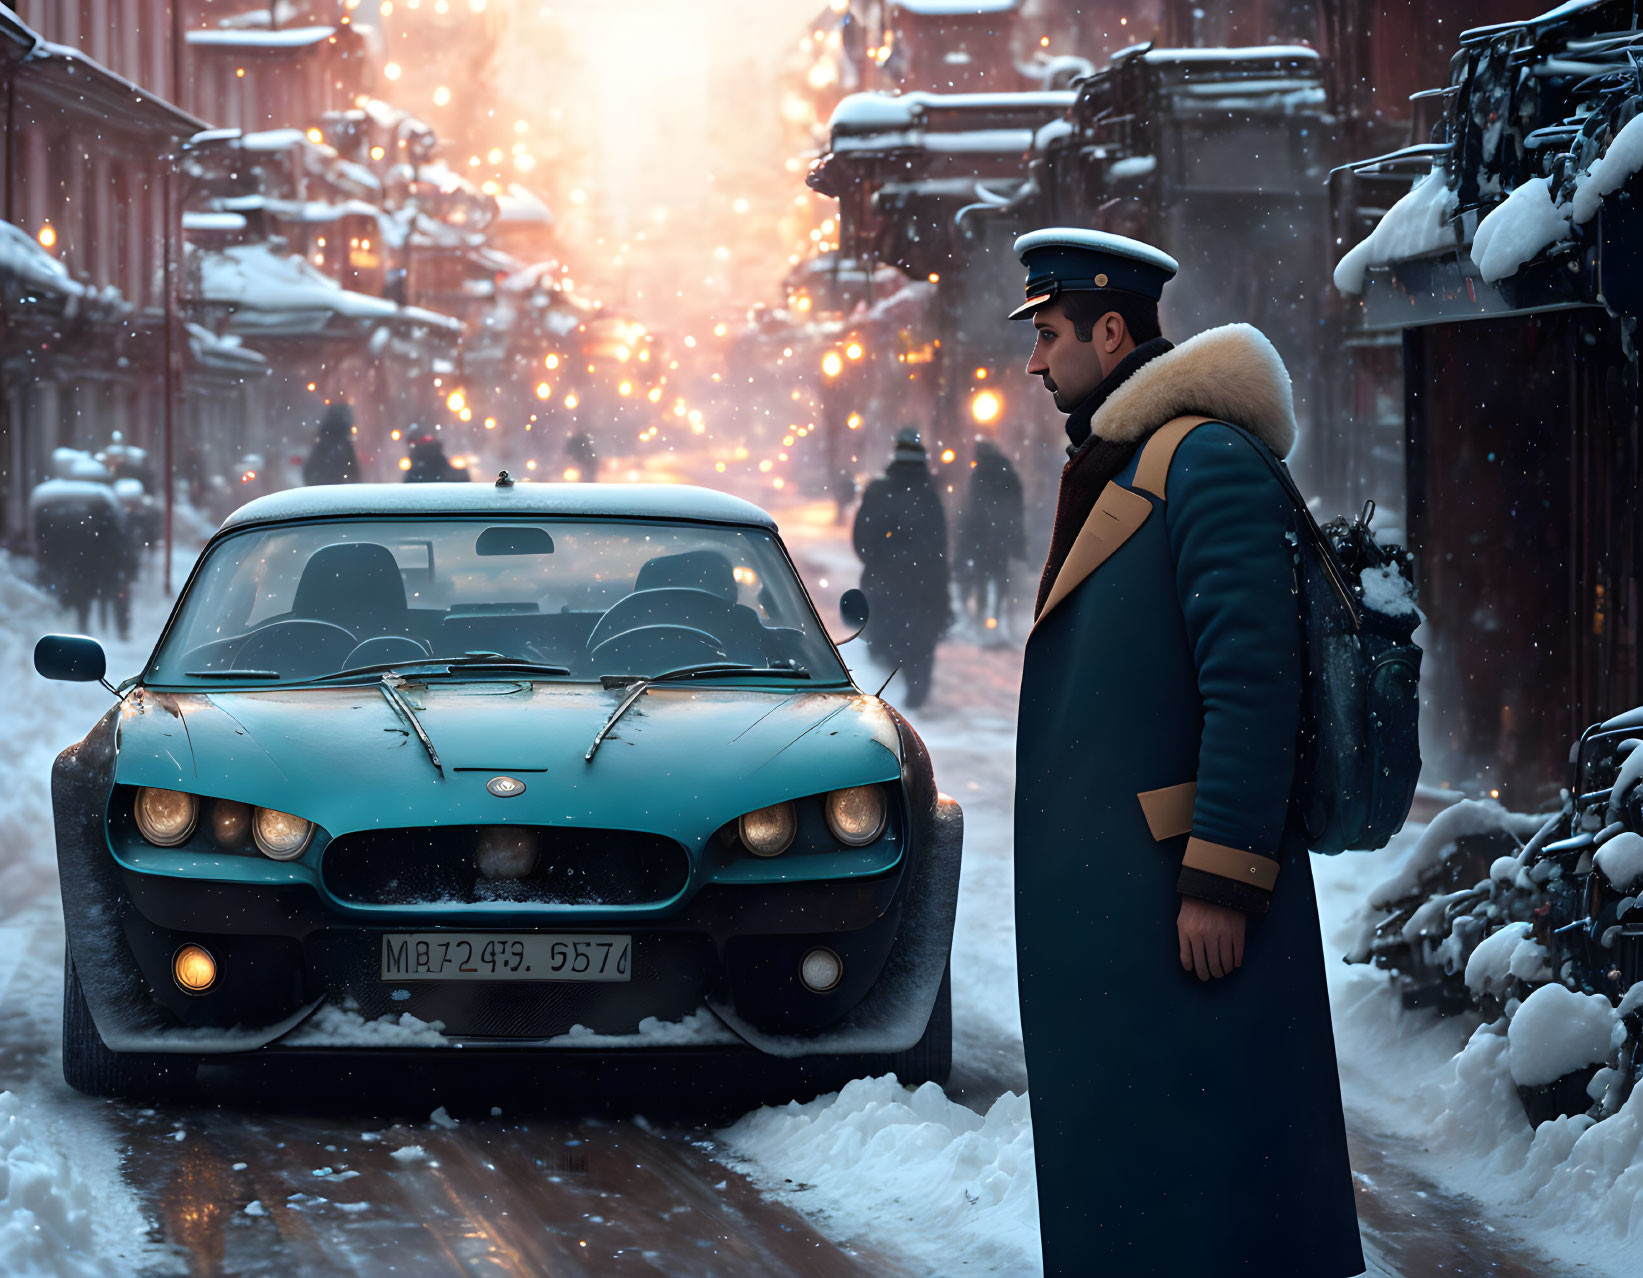 Uniformed Man by Teal Sports Car on Snow-Lined Street at Sunset